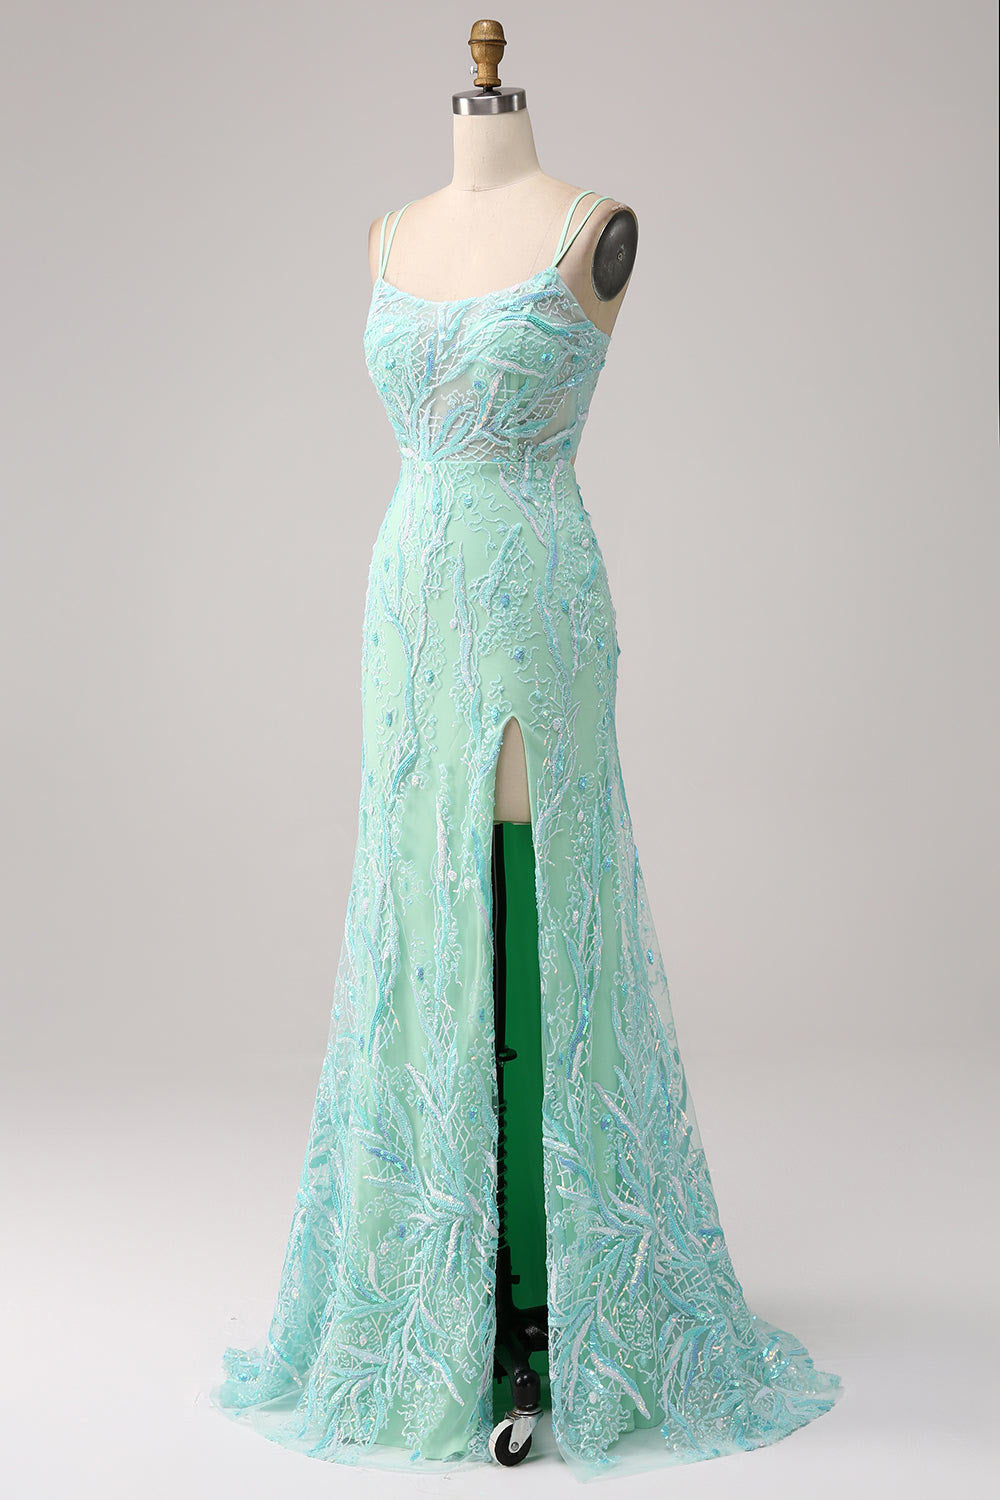 Floral embroidery prom dress, slit party dress, custom light green evening gown